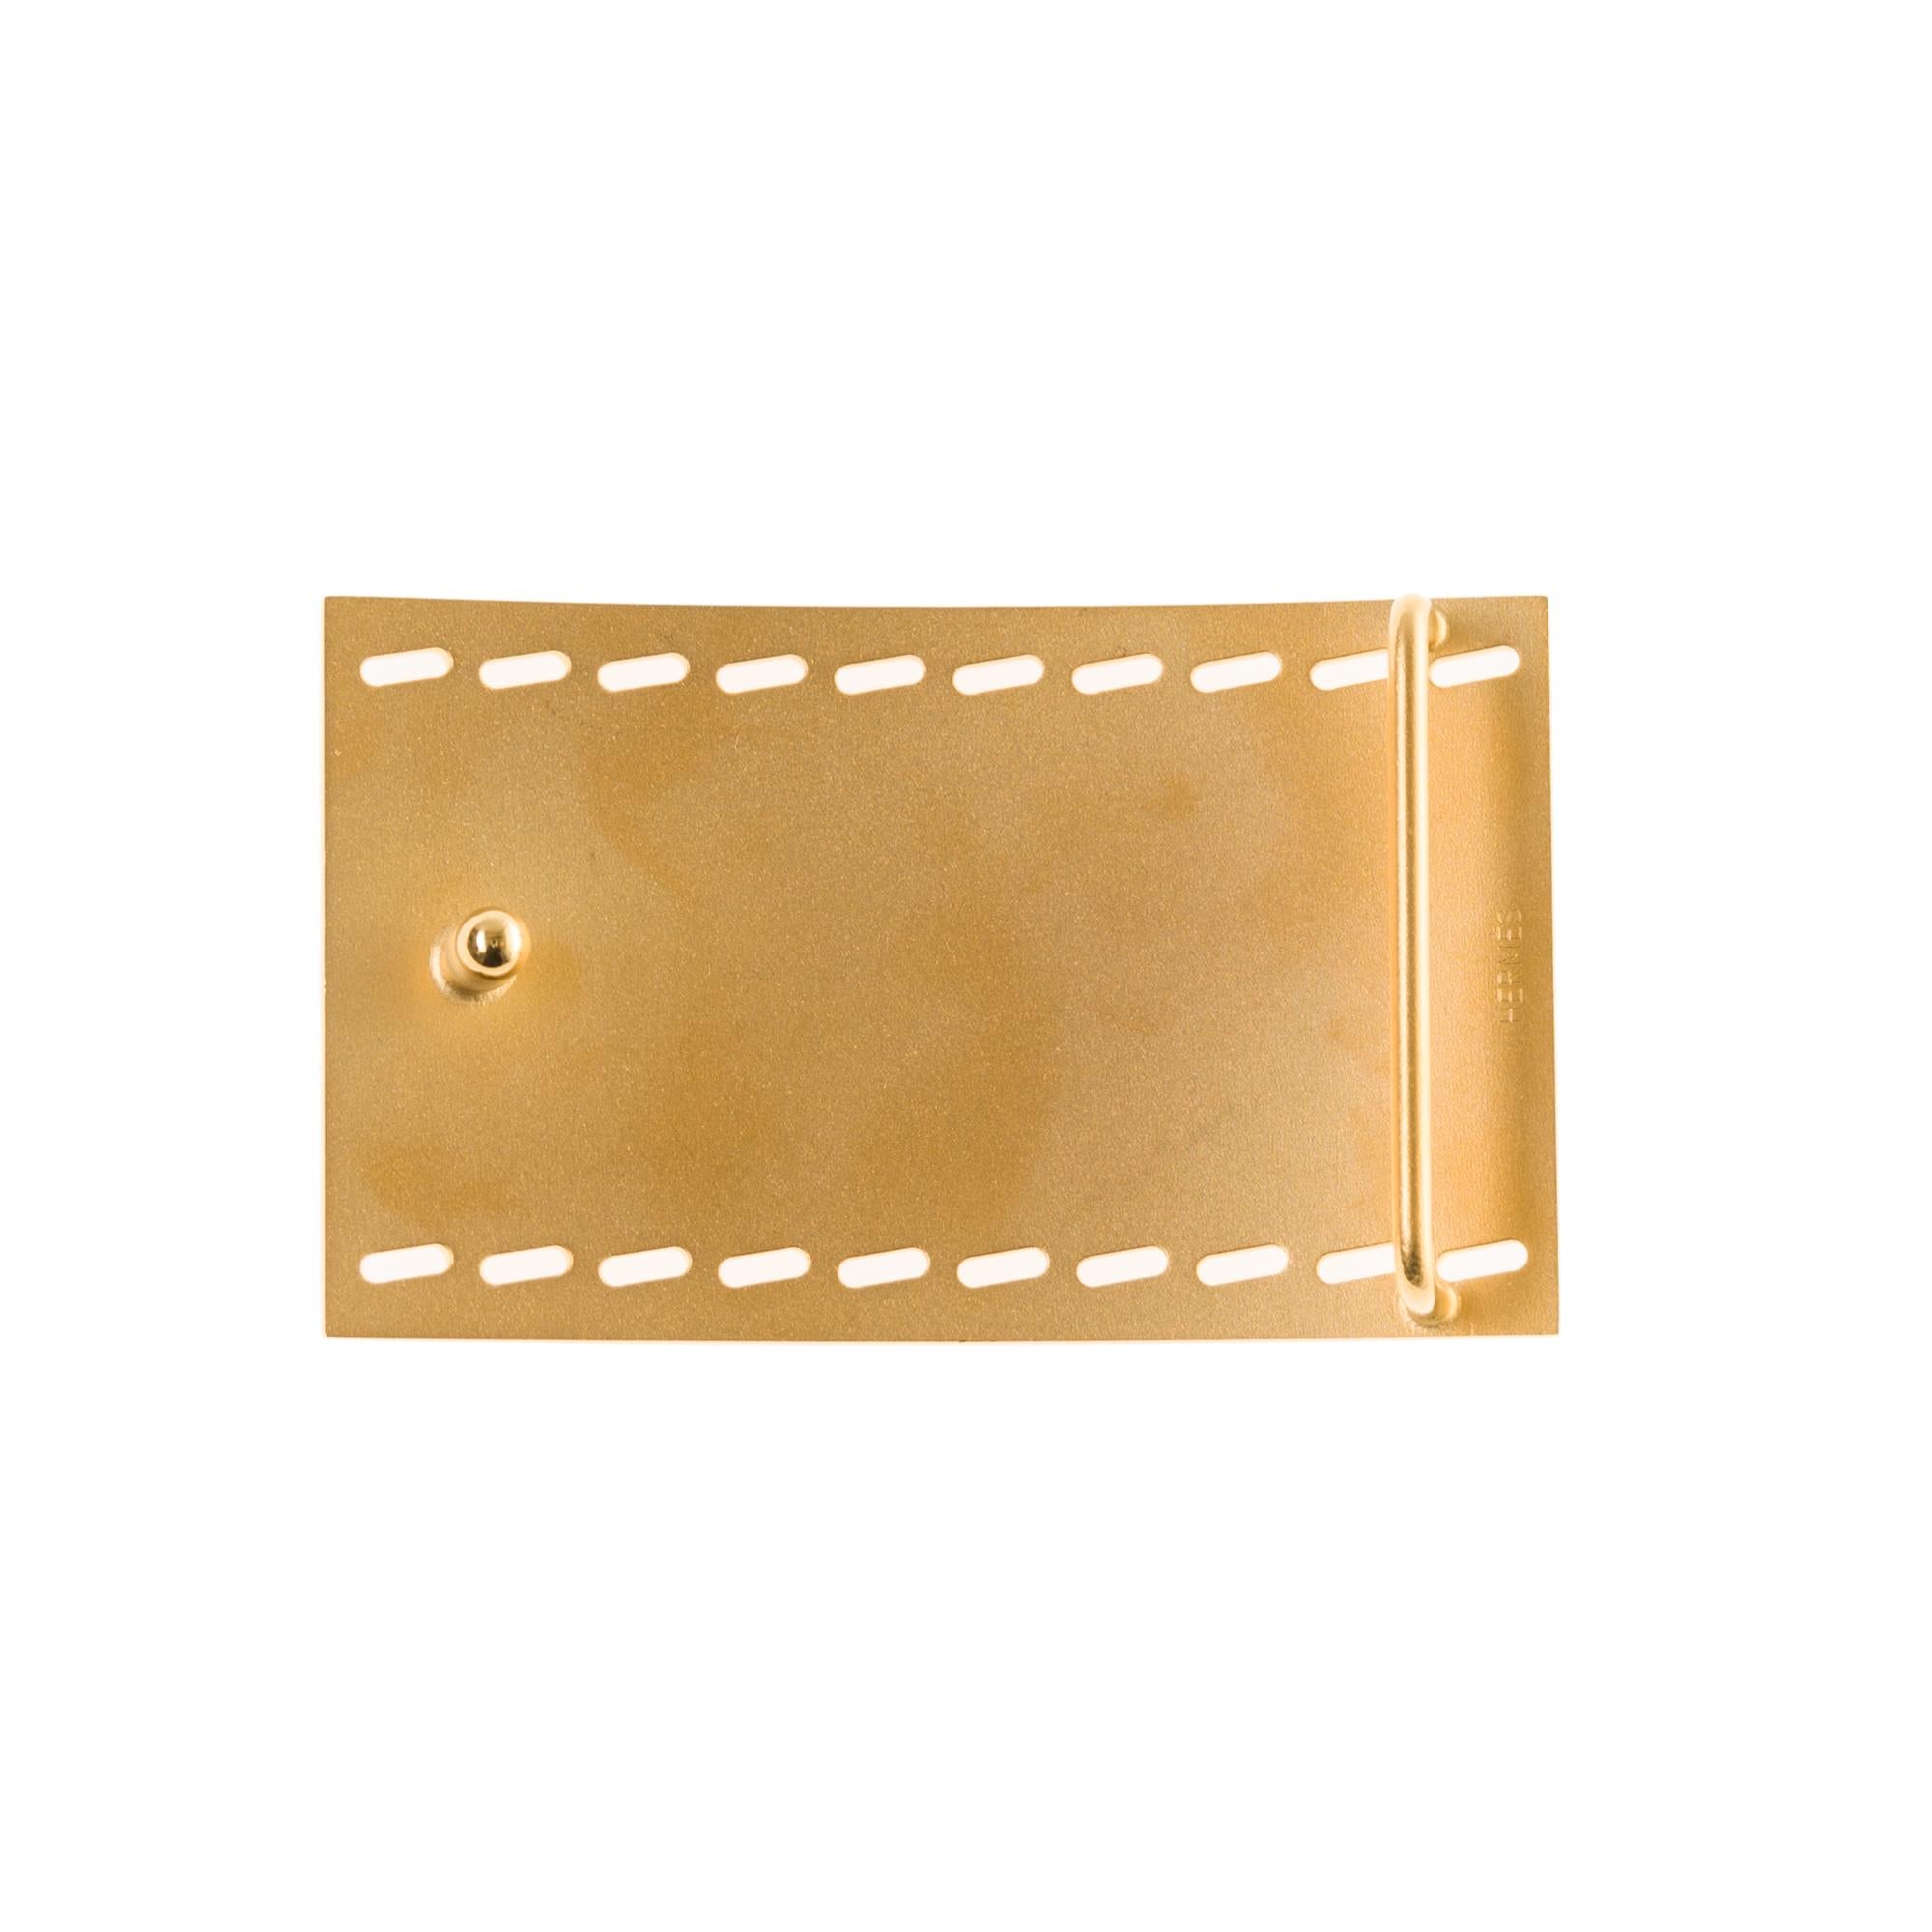 Type: Belt buckle 
Brand: Hermès 
Material: Gold-plated metal with bias pattern
Colour: Gold 
Signed HERMES 
Shape: rectangle
For 3.2 cm wide leather link (leather link not provided) 
Dimensions: H: 3.7 x W: 6.3 x D: 1.4 cm 
In Excellent condition -